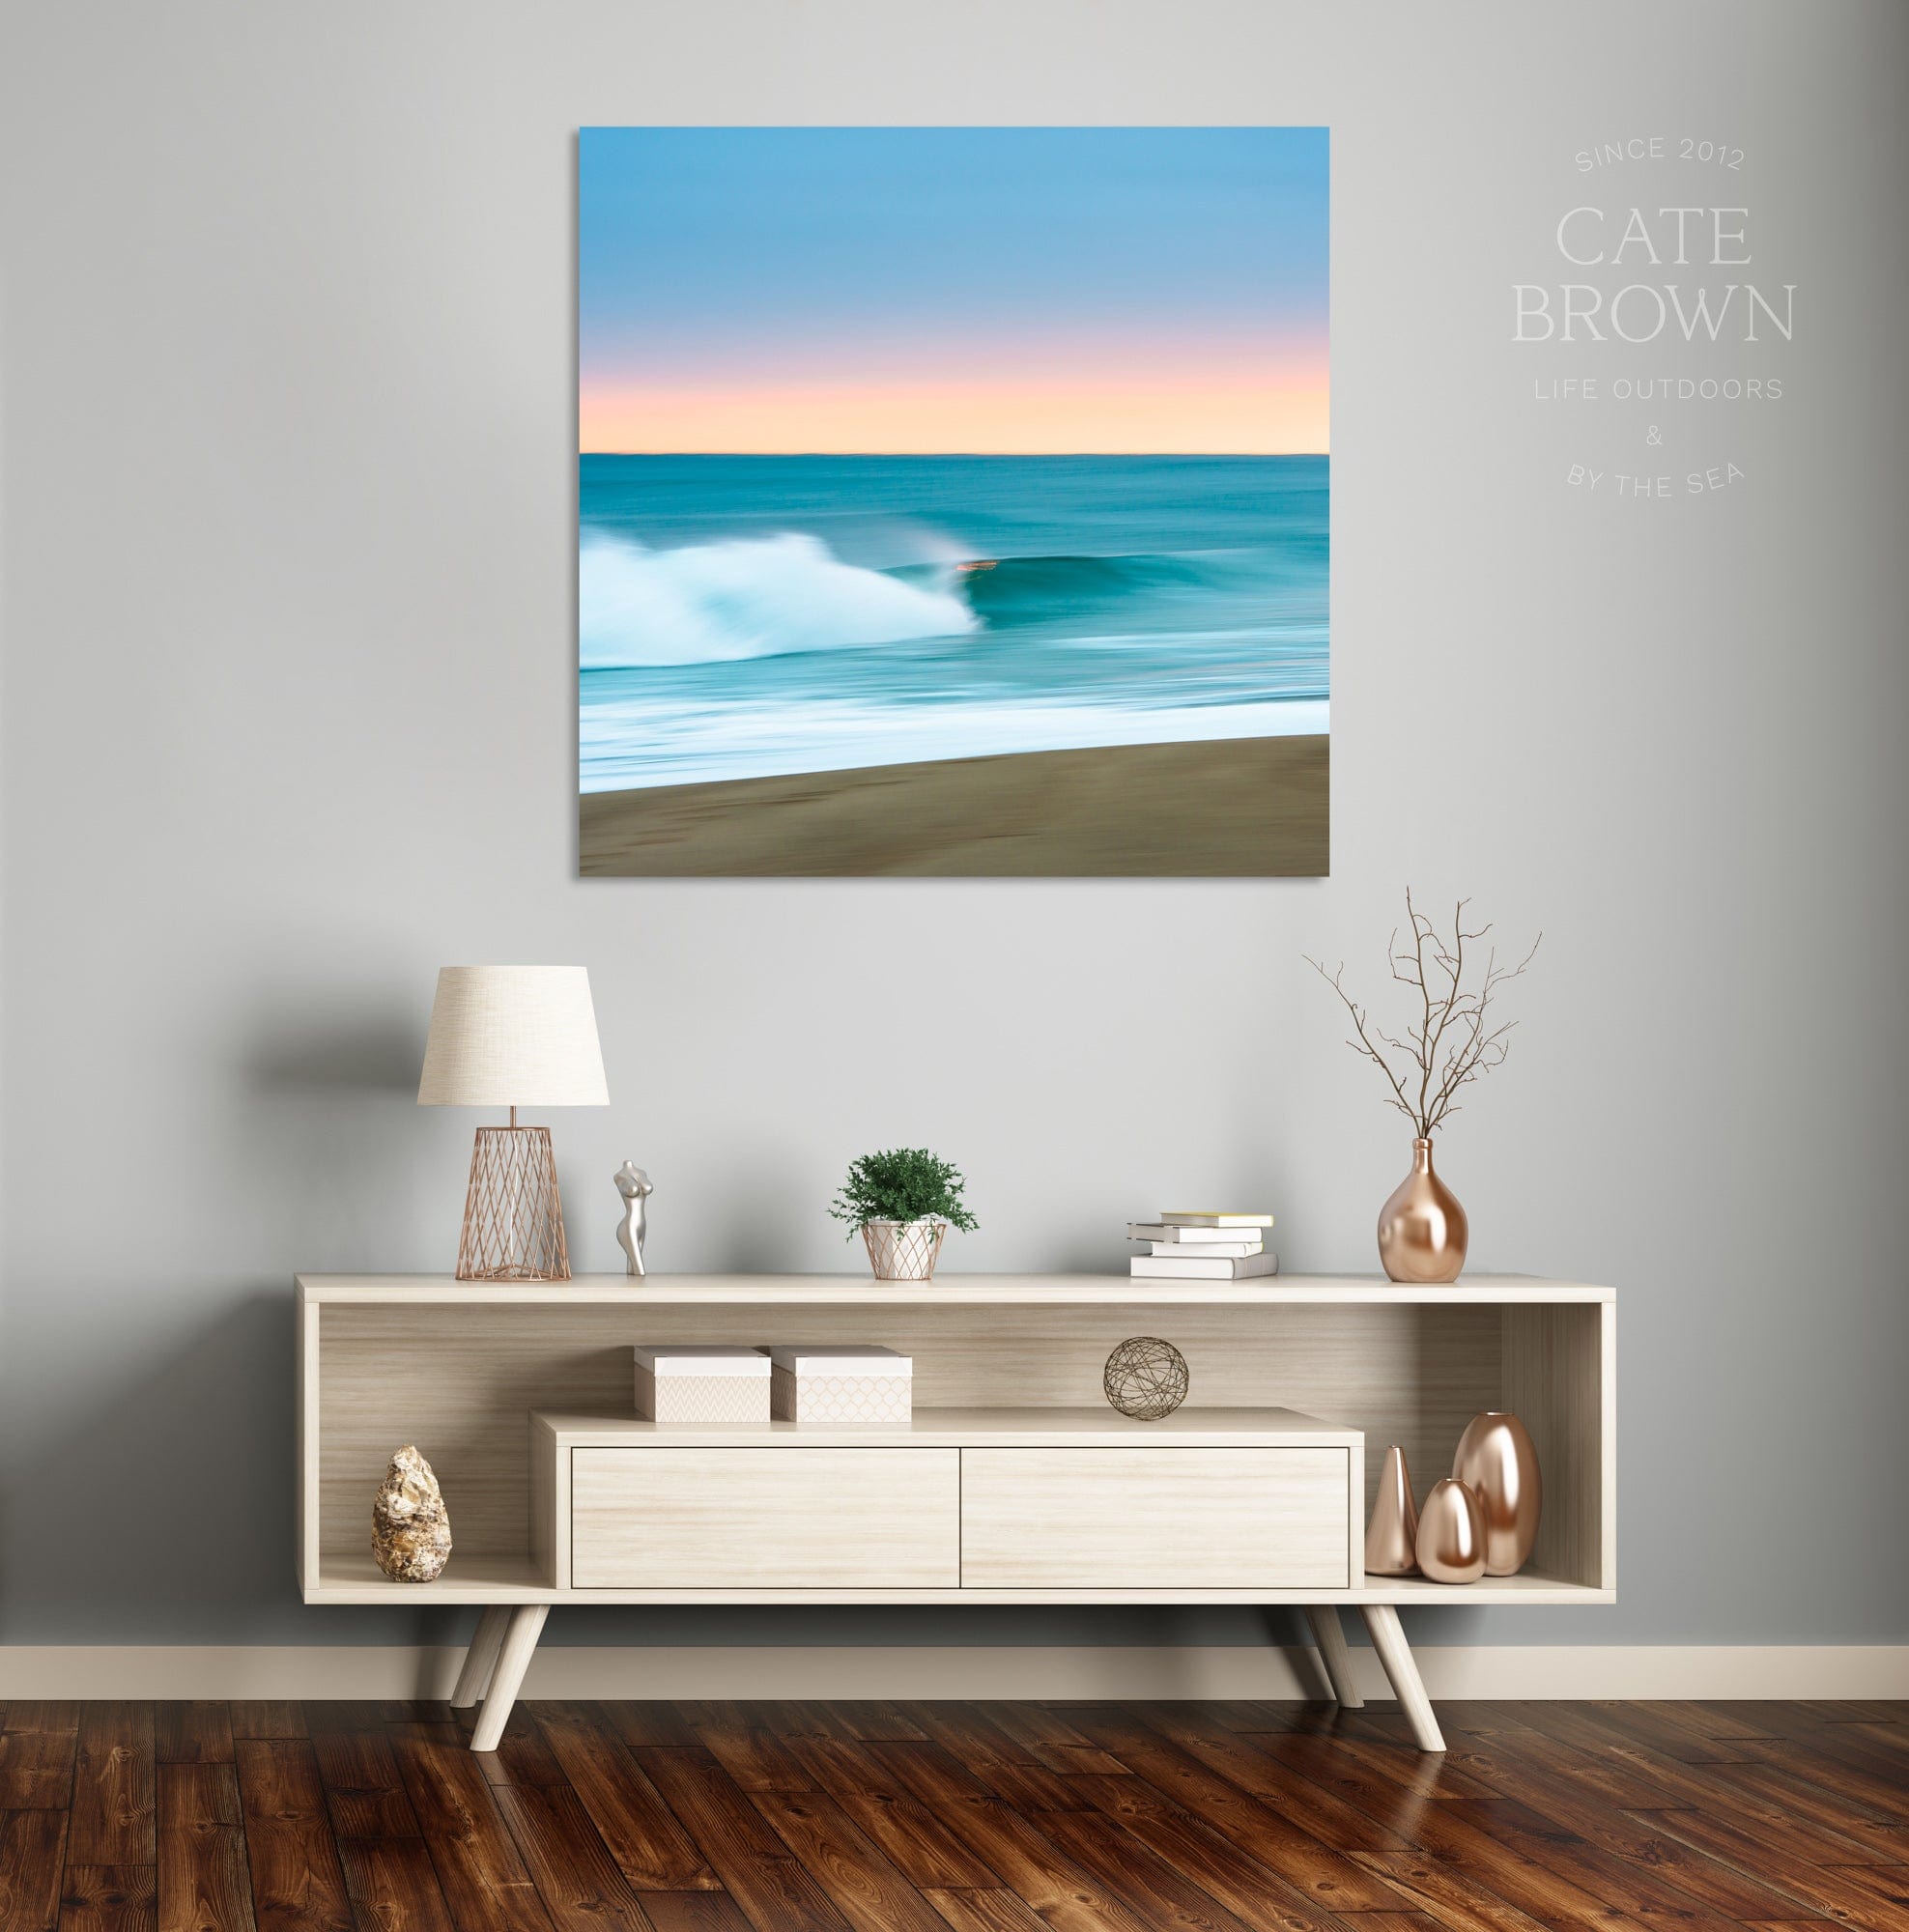 Cate Brown Photo Canvas / 16"x16" / None (Print Only) Matunuck #4  //  Abstract Photography Made to Order Ocean Fine Art